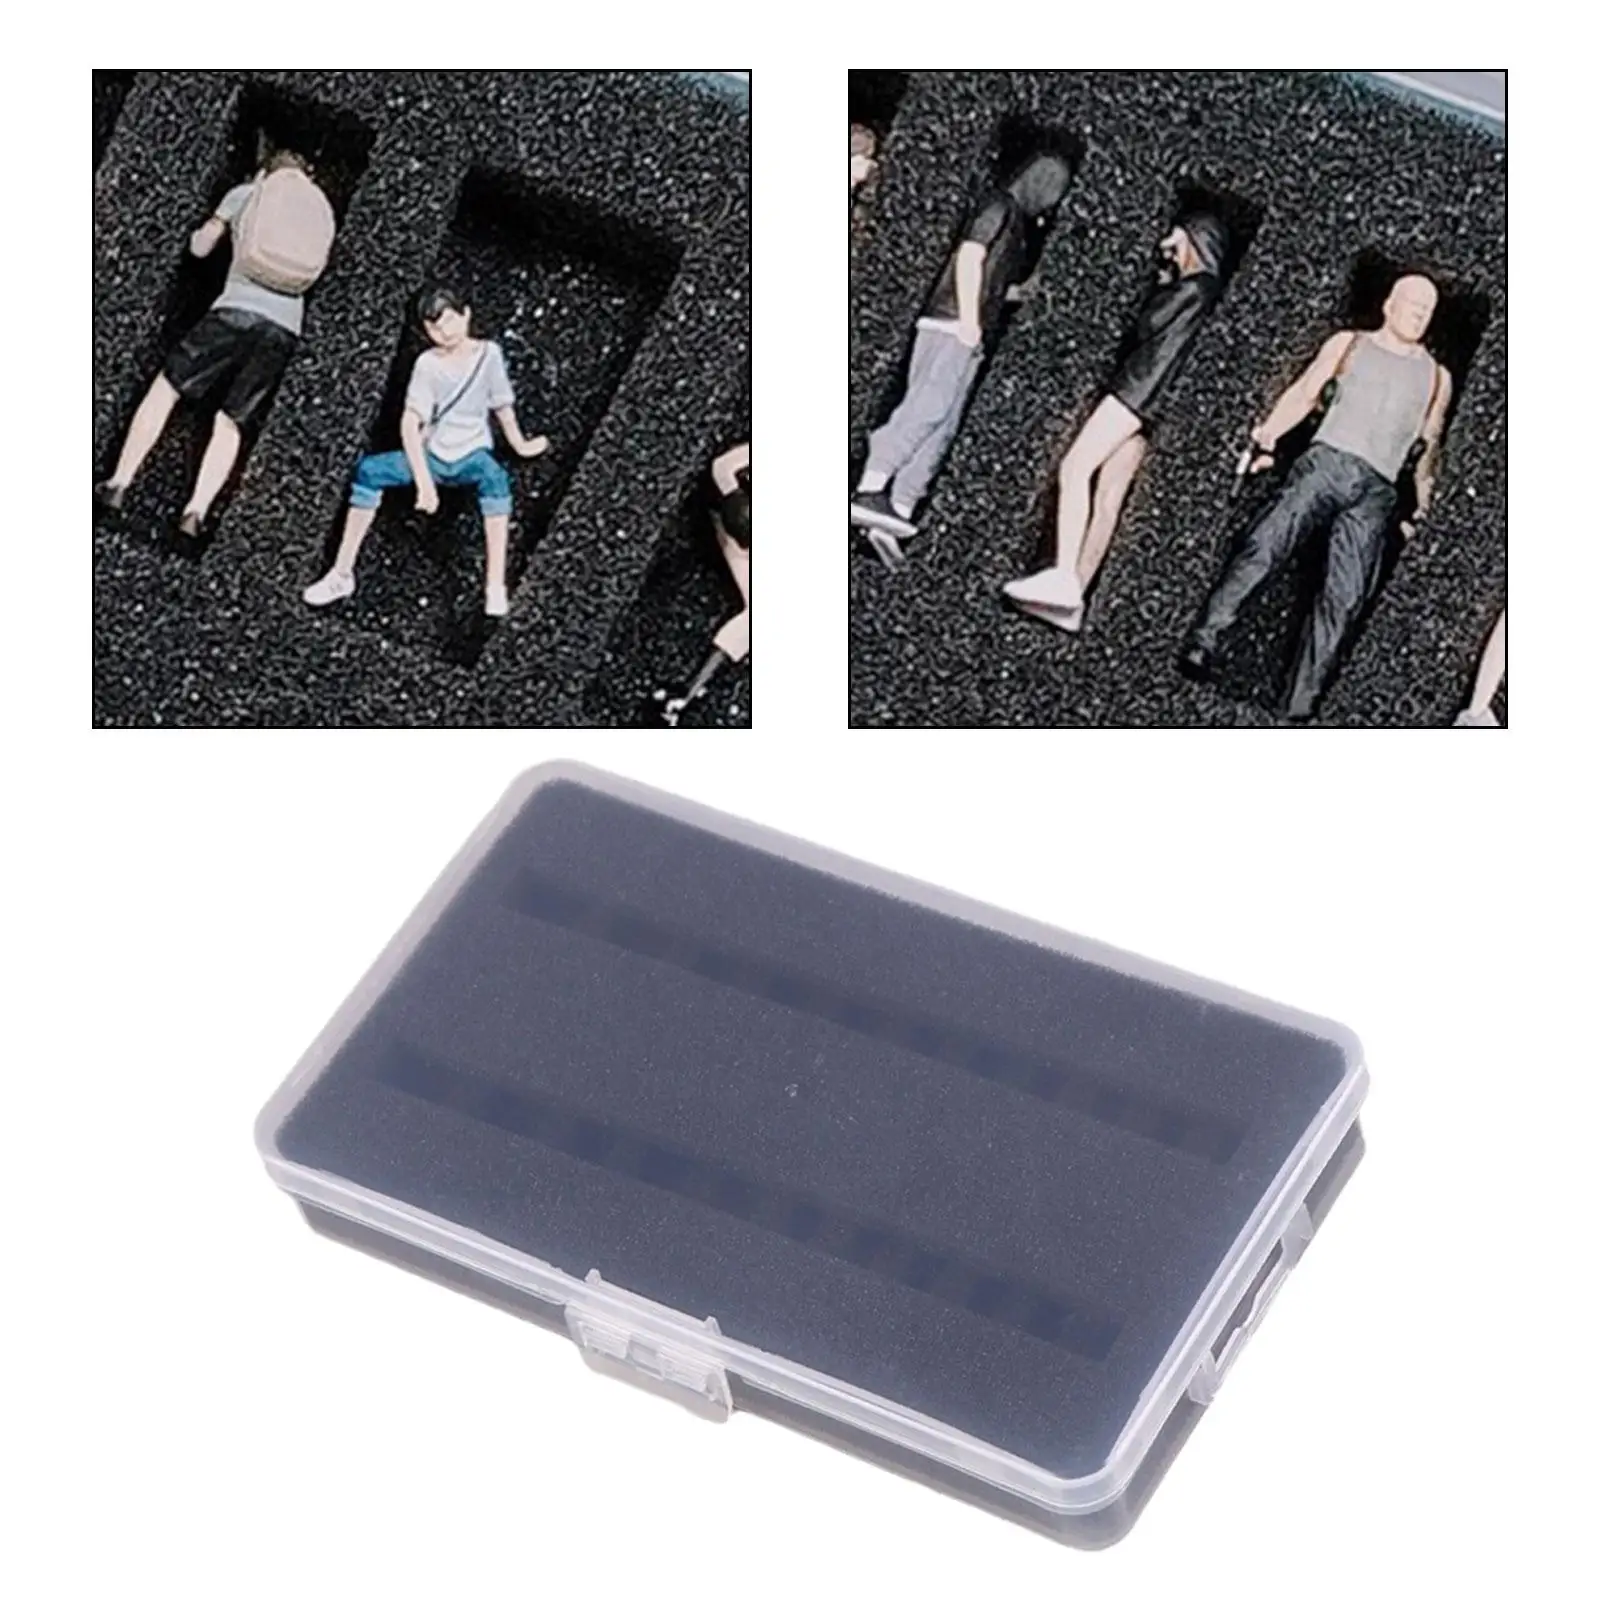 1/64 Doll Storage Box Multipurpose Protective Container Display Case for Figurines Show Household Action Figure Collectibles